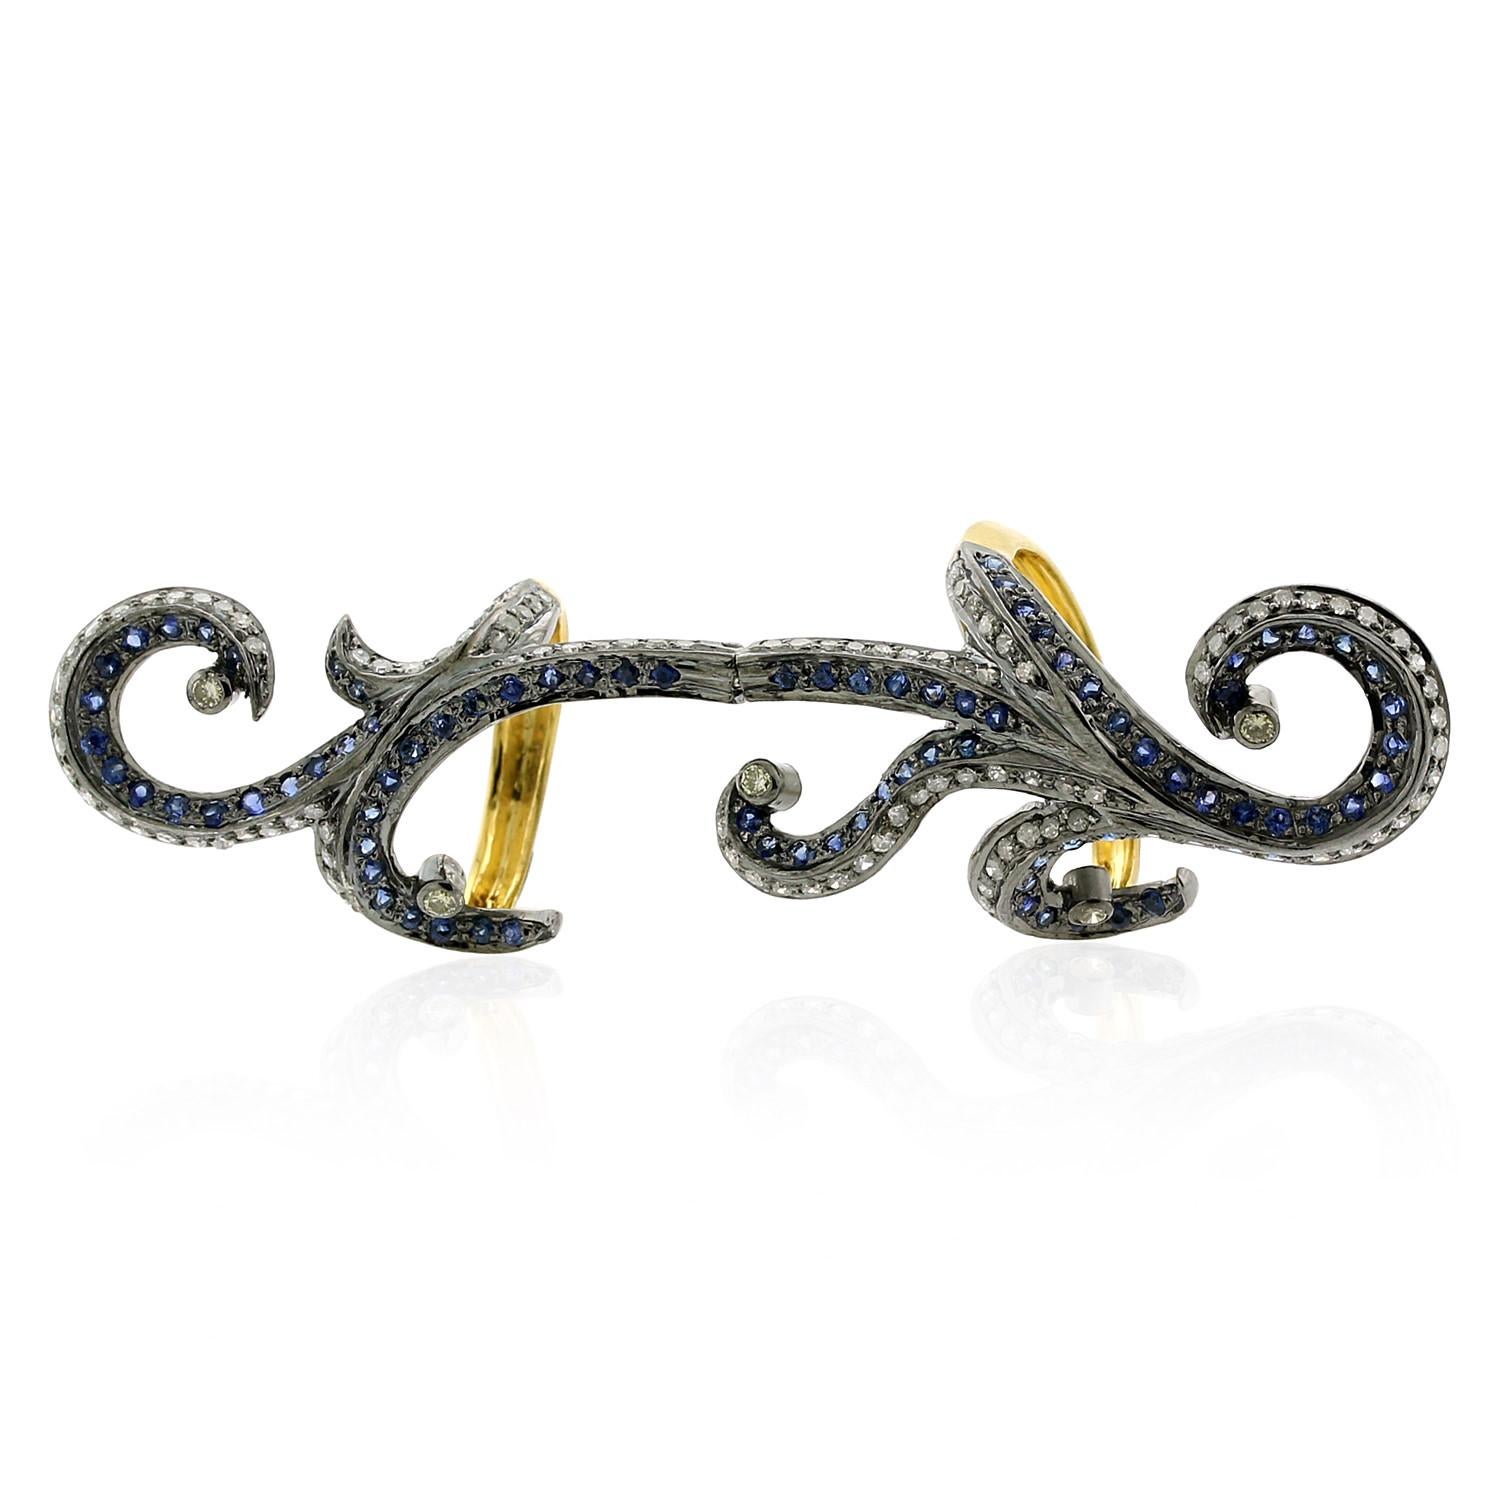 Mixed Cut Pave Sapphire & Pave Diamonds Antique Looking Long Ring in 18k Gold & Silver For Sale